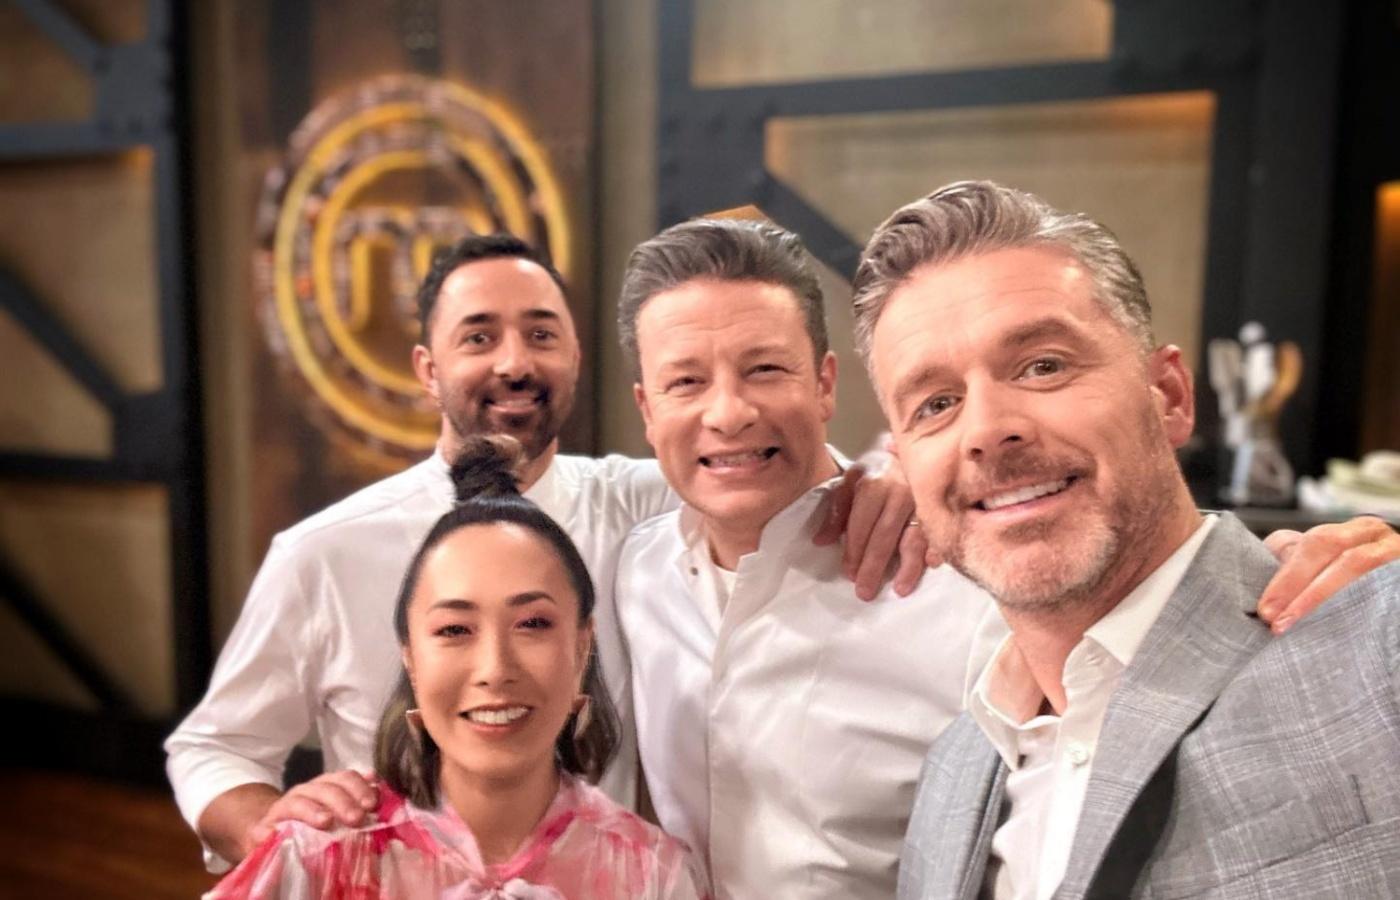 Jamie Oliver shared a picture on MasterChef Australia with Jock Zonfrillo following news of his death.